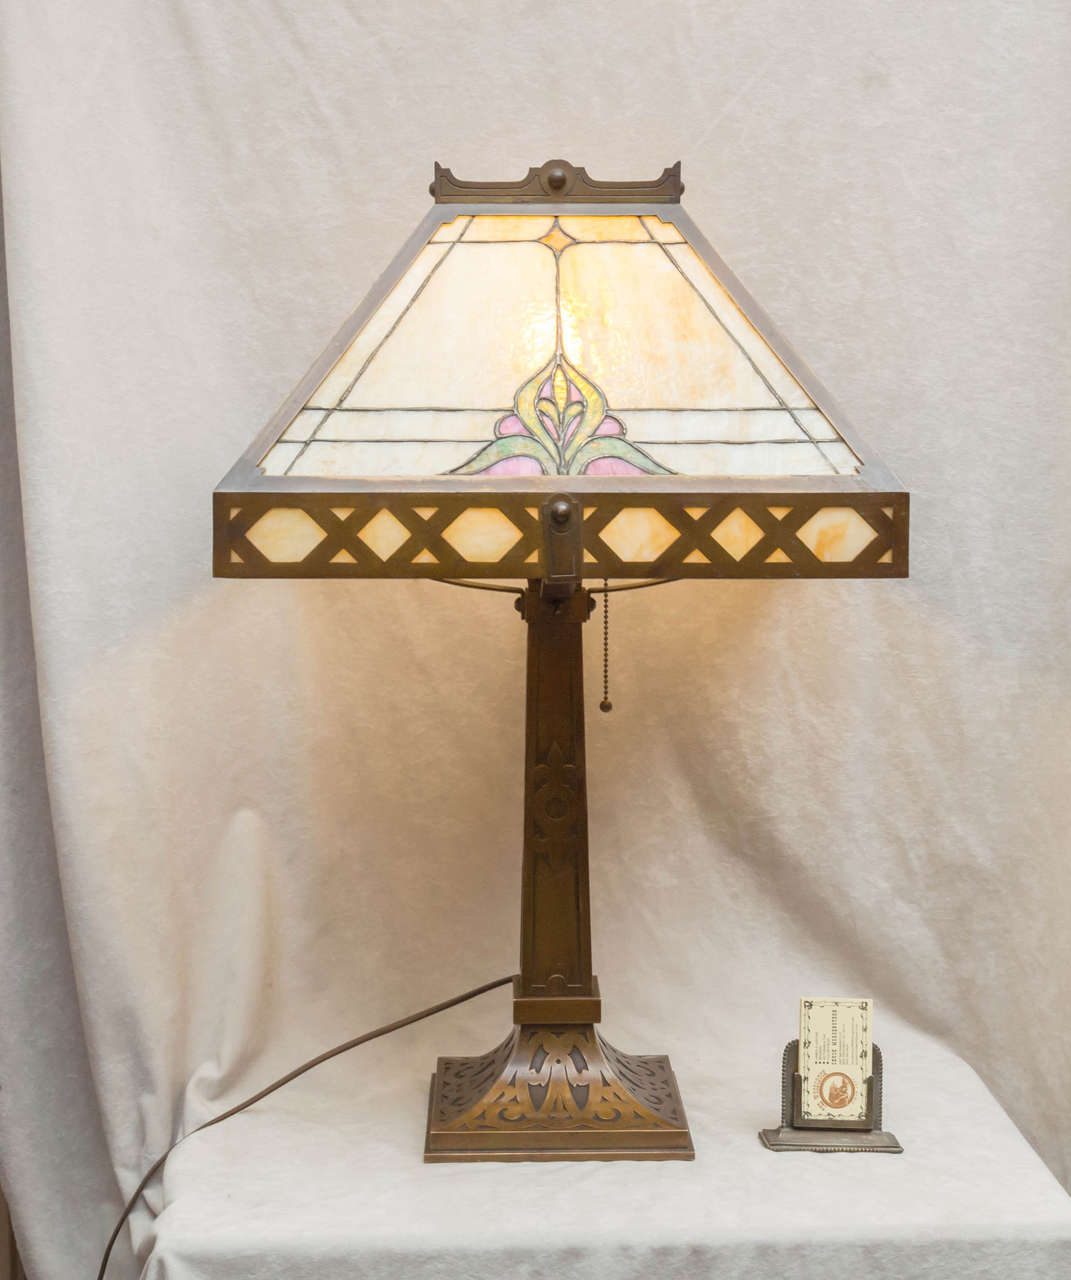 This very impressive and large table lamp is rare in that while it is a panel lamp, the glass in the panels is leaded glass. A rare and more desirable than the standard panel lamp which usually just has one piece of glass in the panel. We don't know